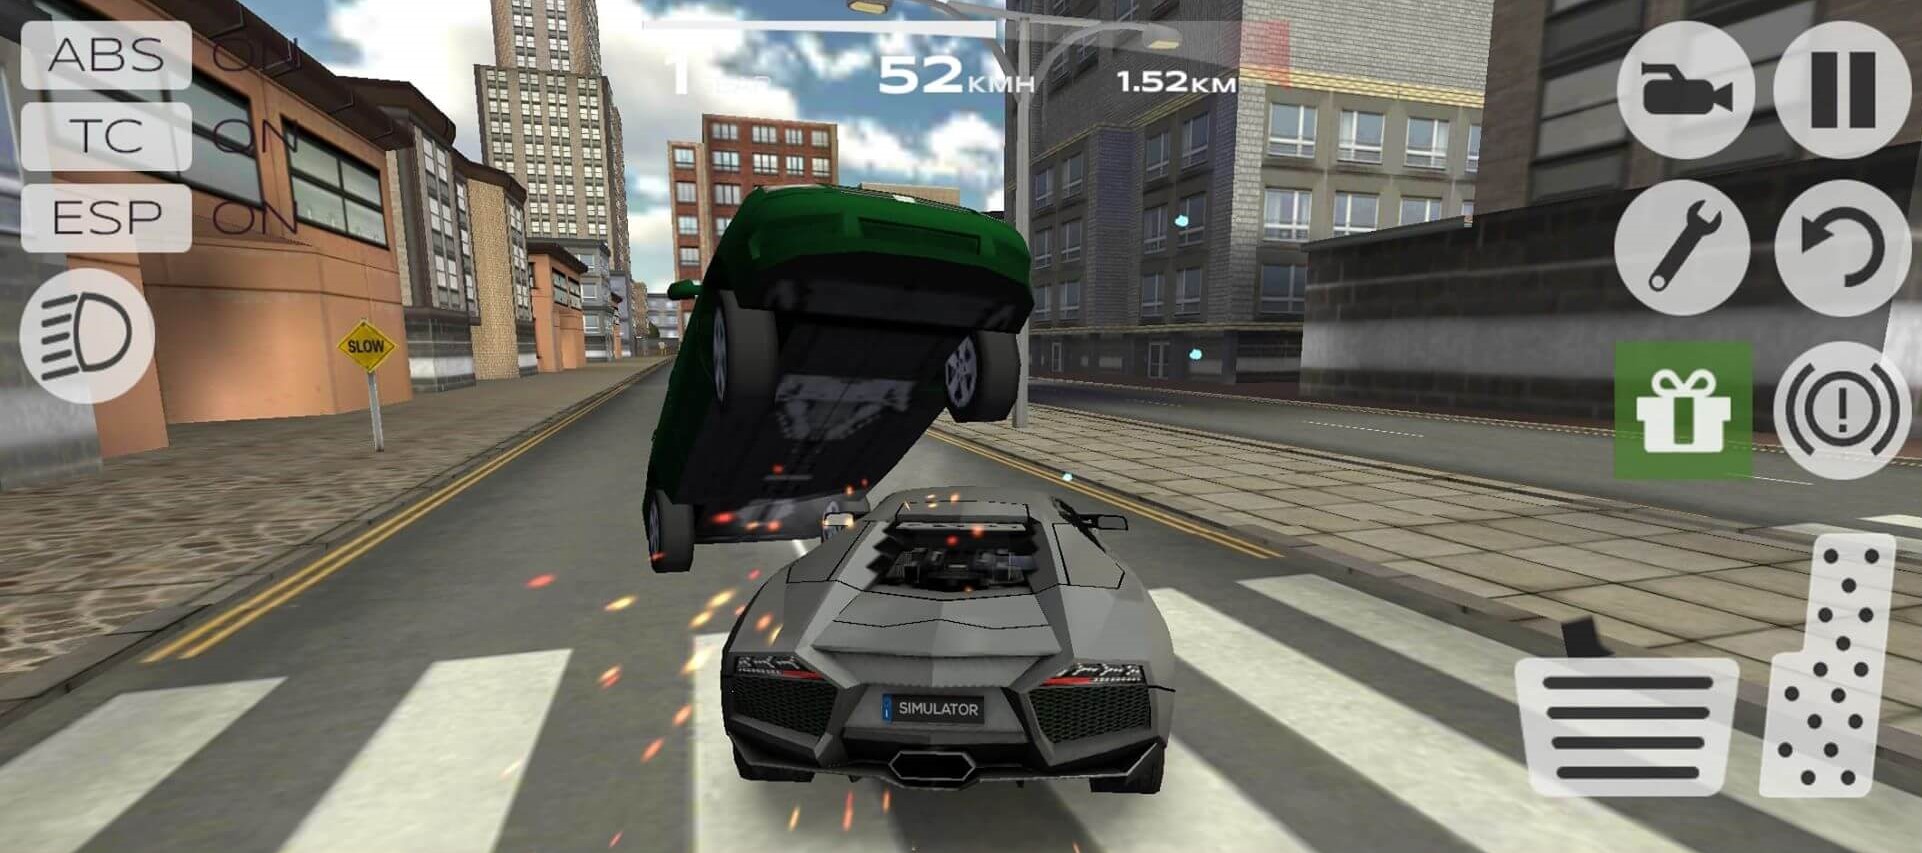 extreme car driving simulator game download for pc